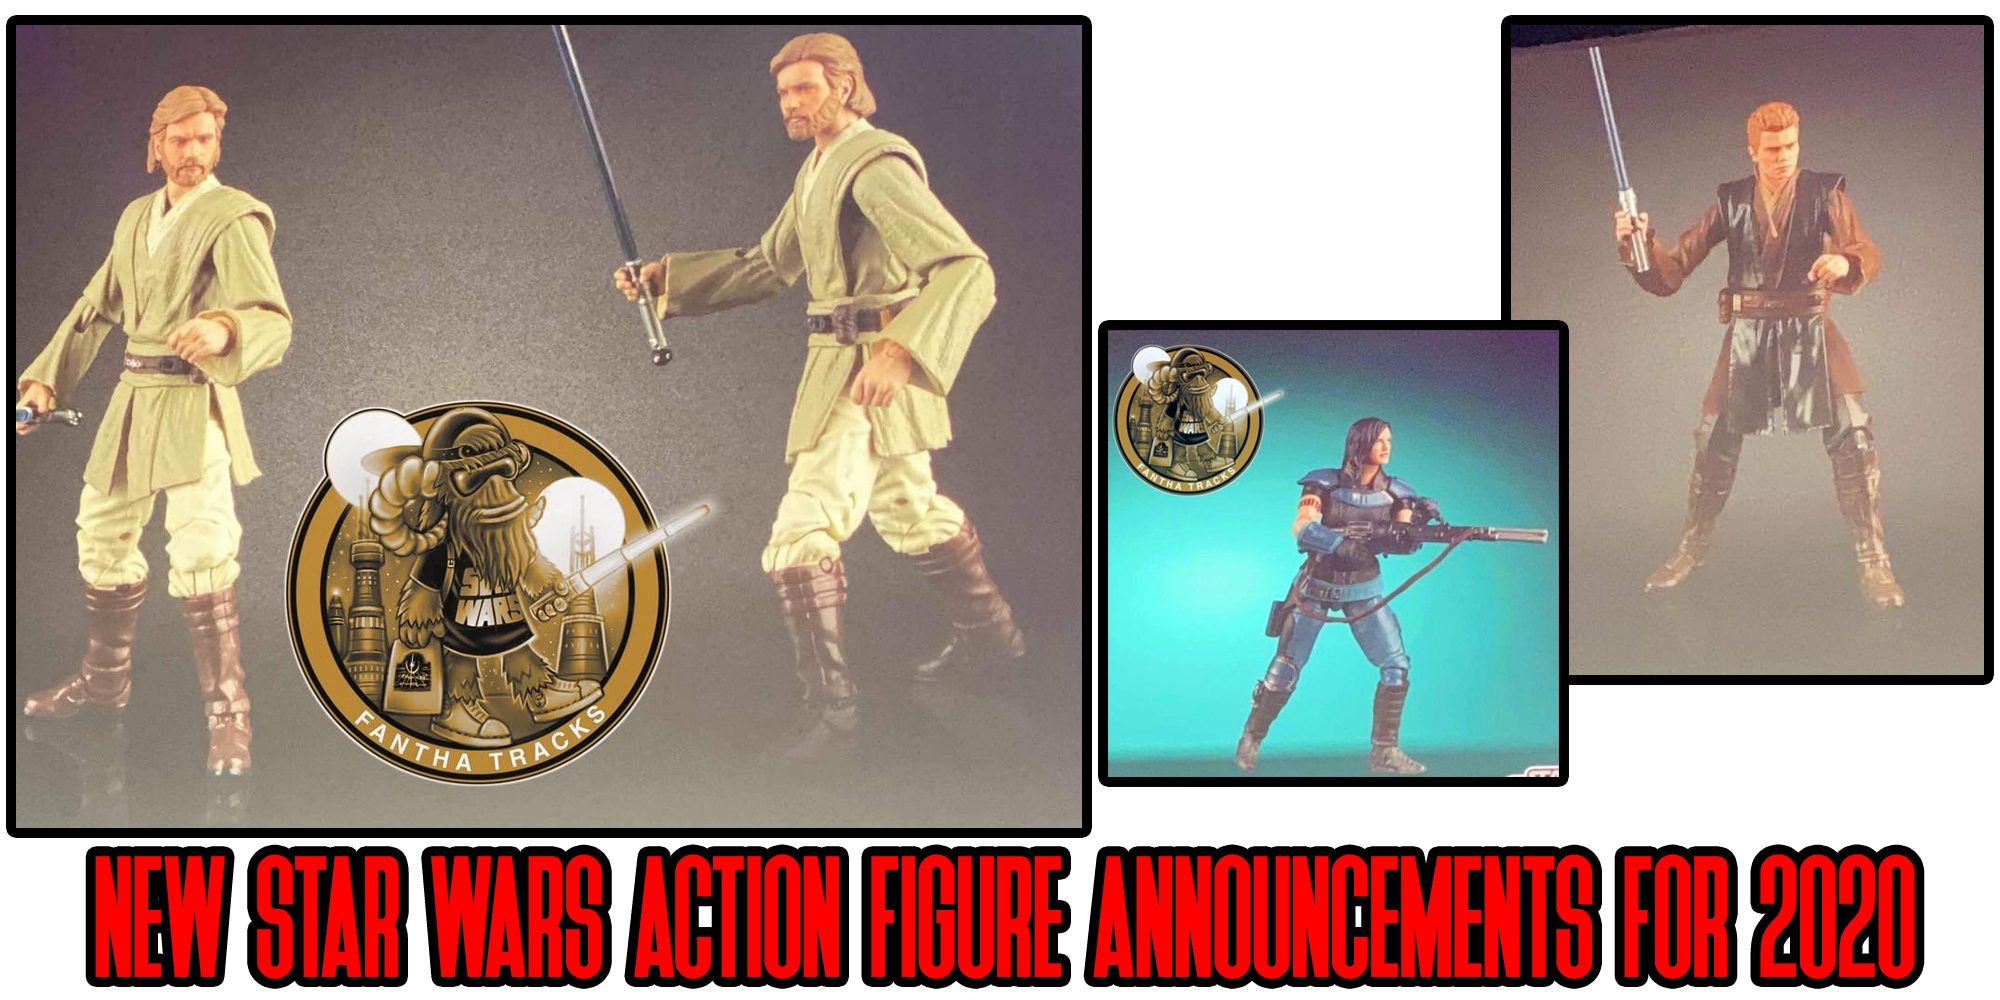 New Star Wars Figures For 2020 Announced!